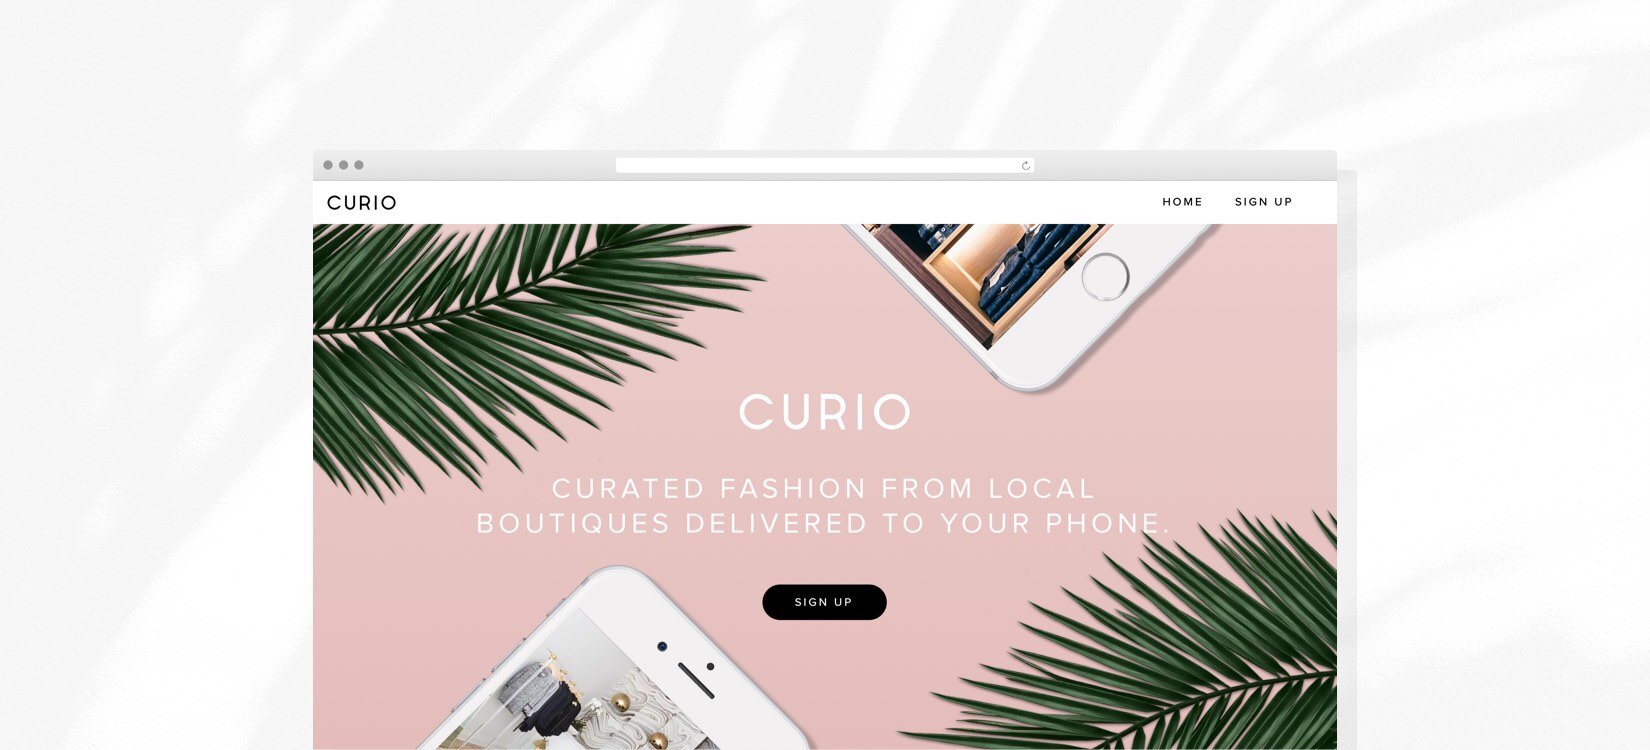 Initial CURIO website created to gather user insights.